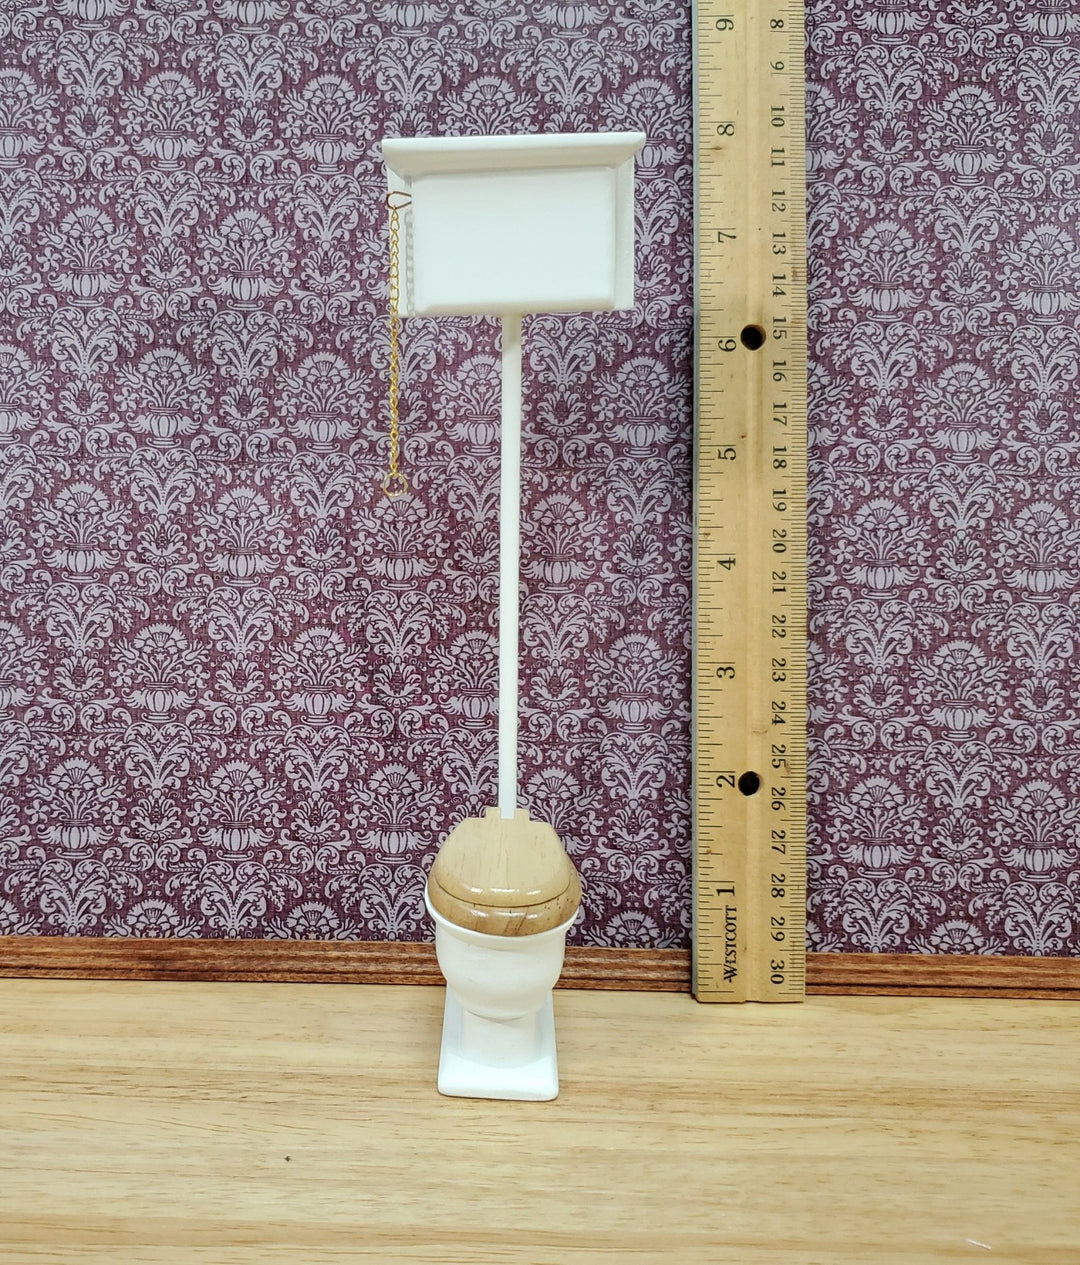 Dollhouse Bathroom Toilet Vintage Style Wood with White Finish 1:12 Scale - Miniature Crush